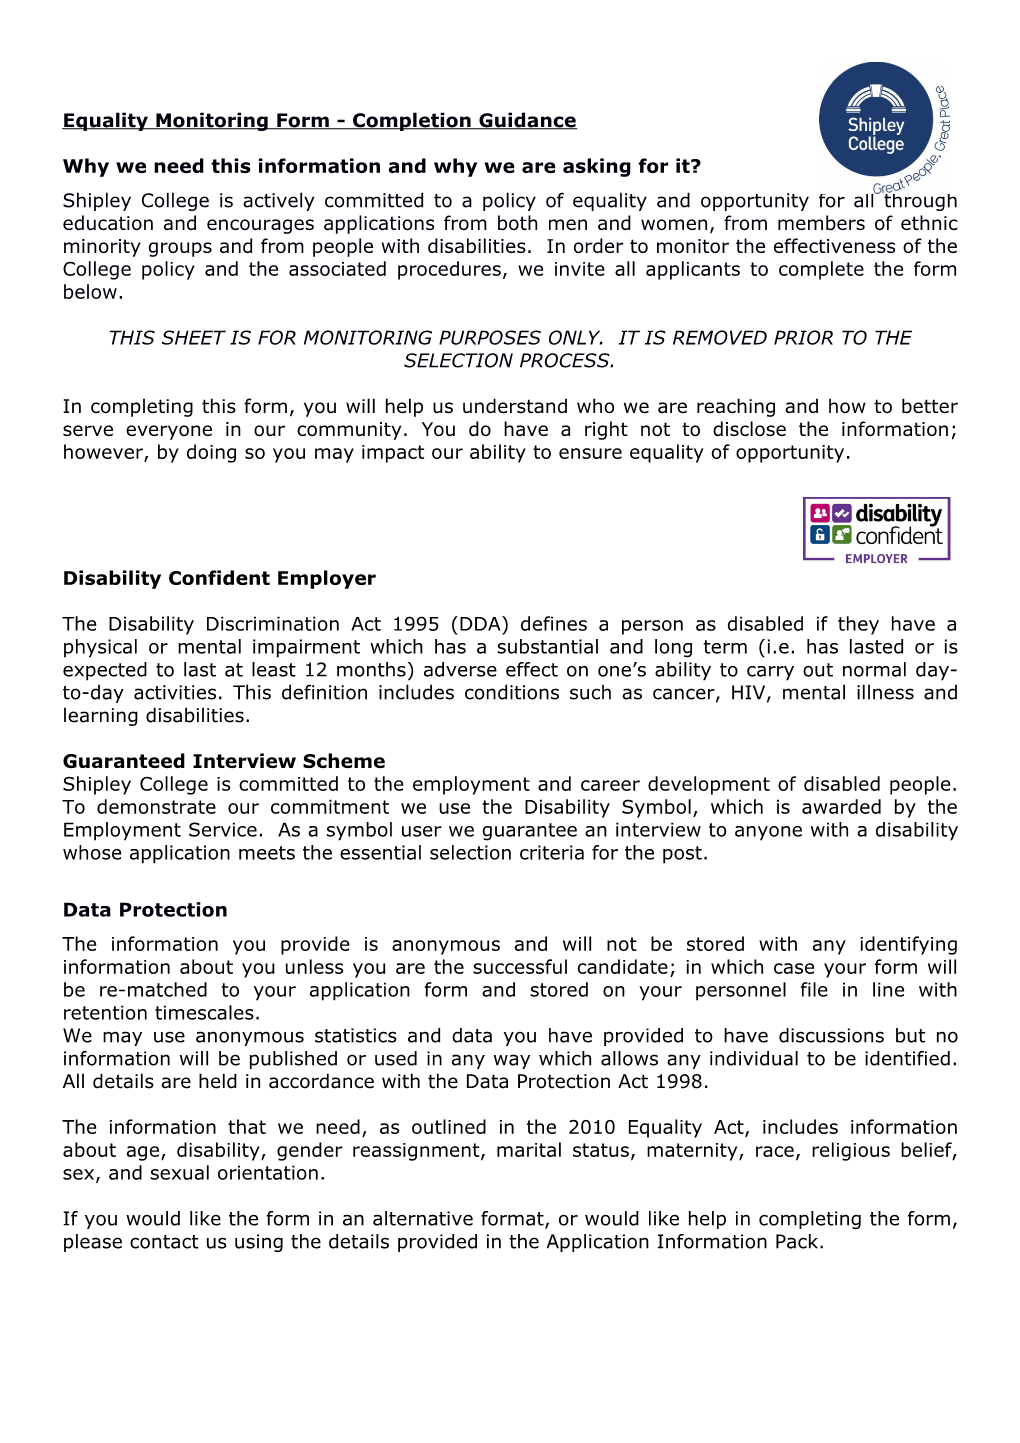 Equality Monitoring Form - Completion Guidance